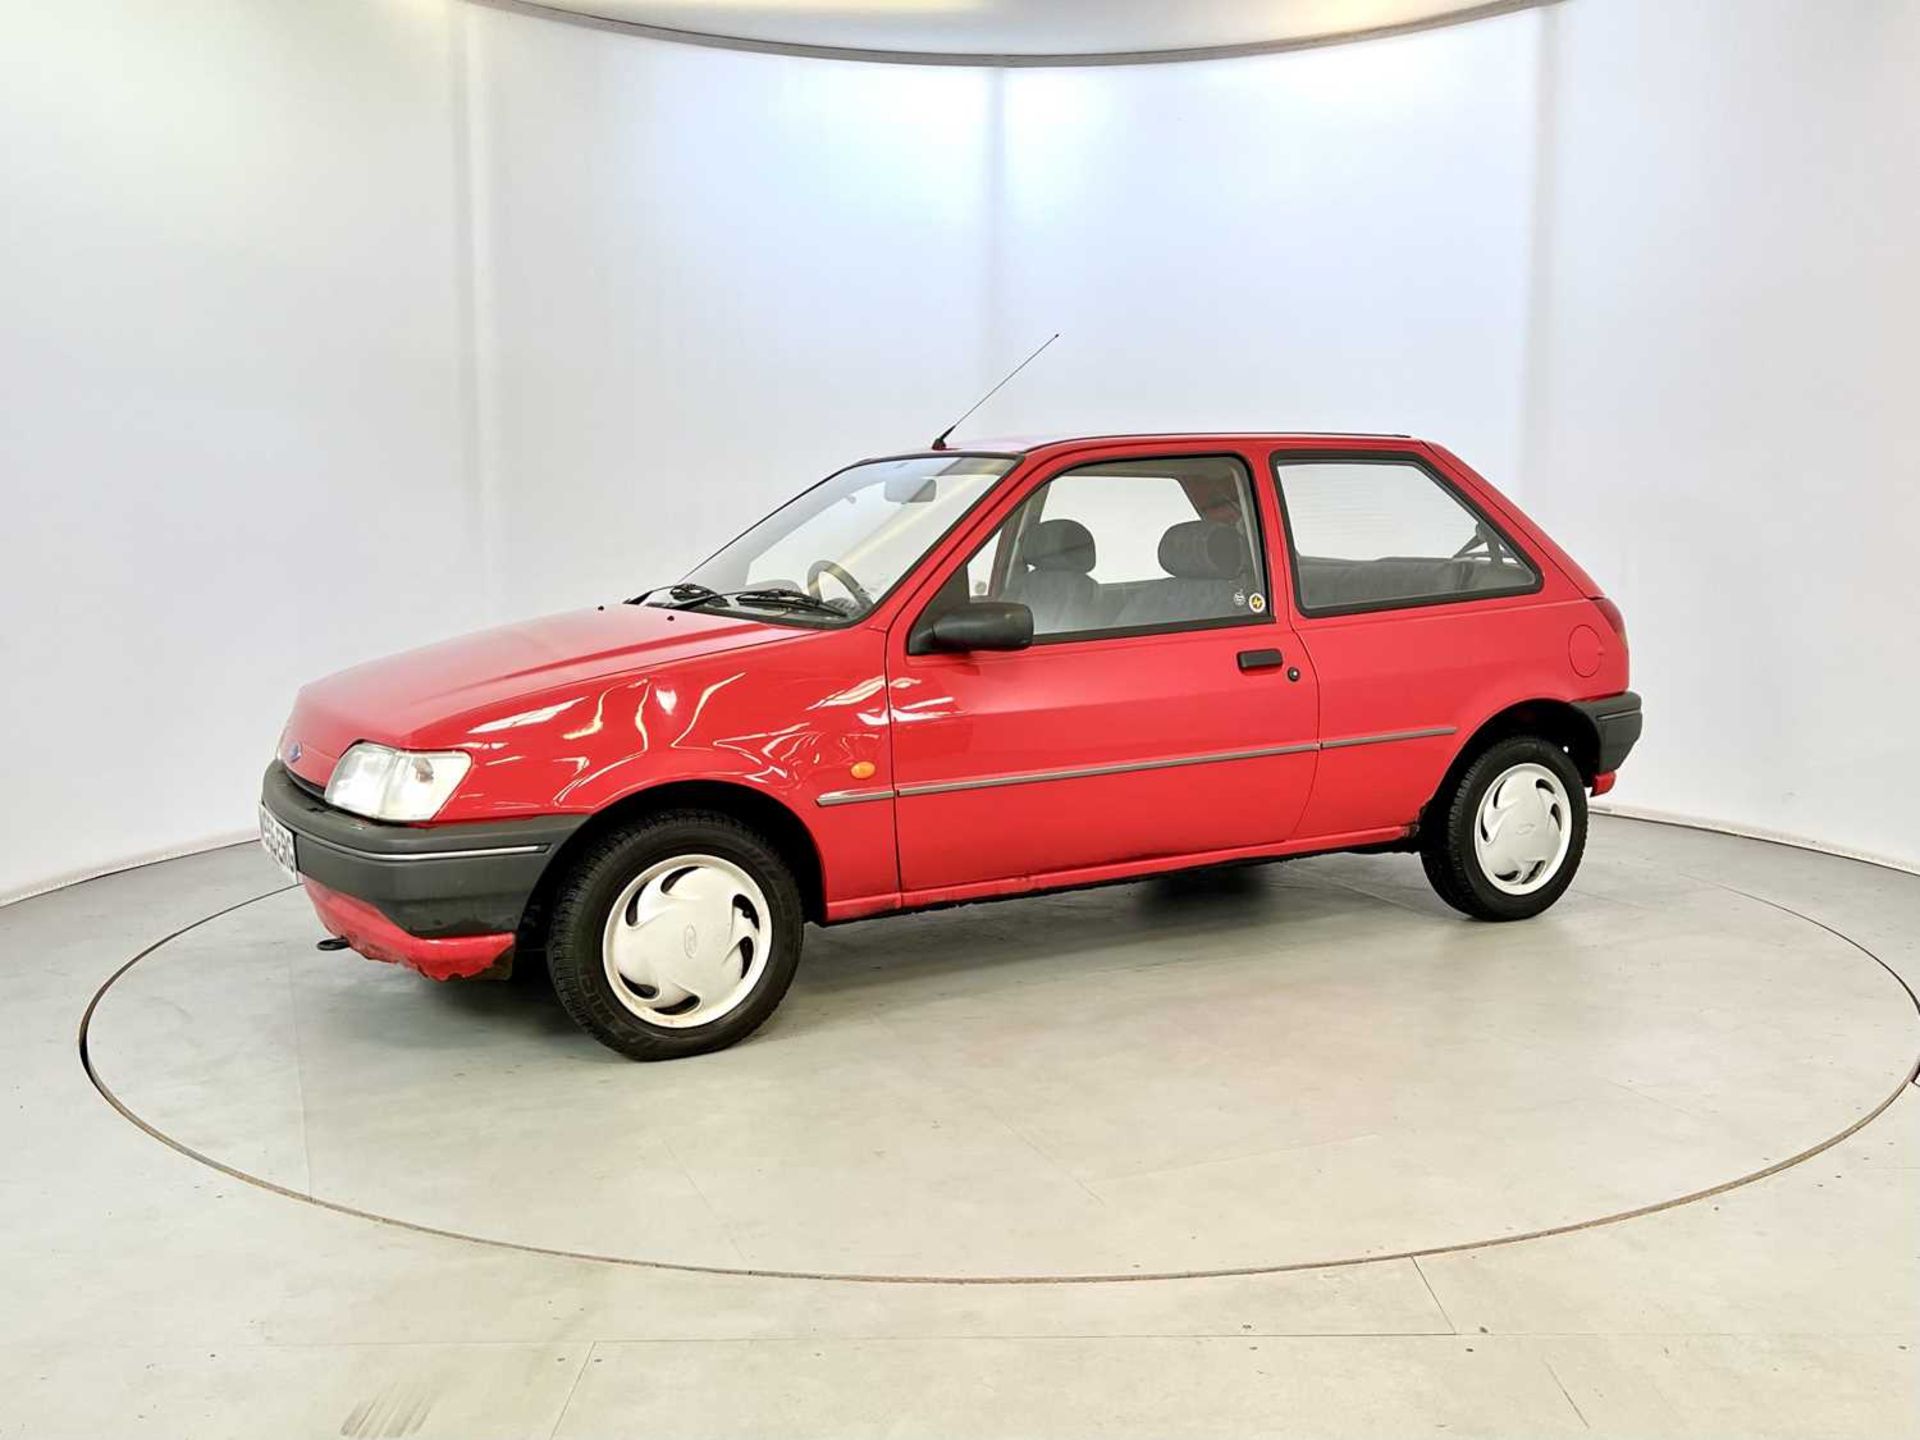 1994 Ford Fiesta Sapphire - Image 4 of 27